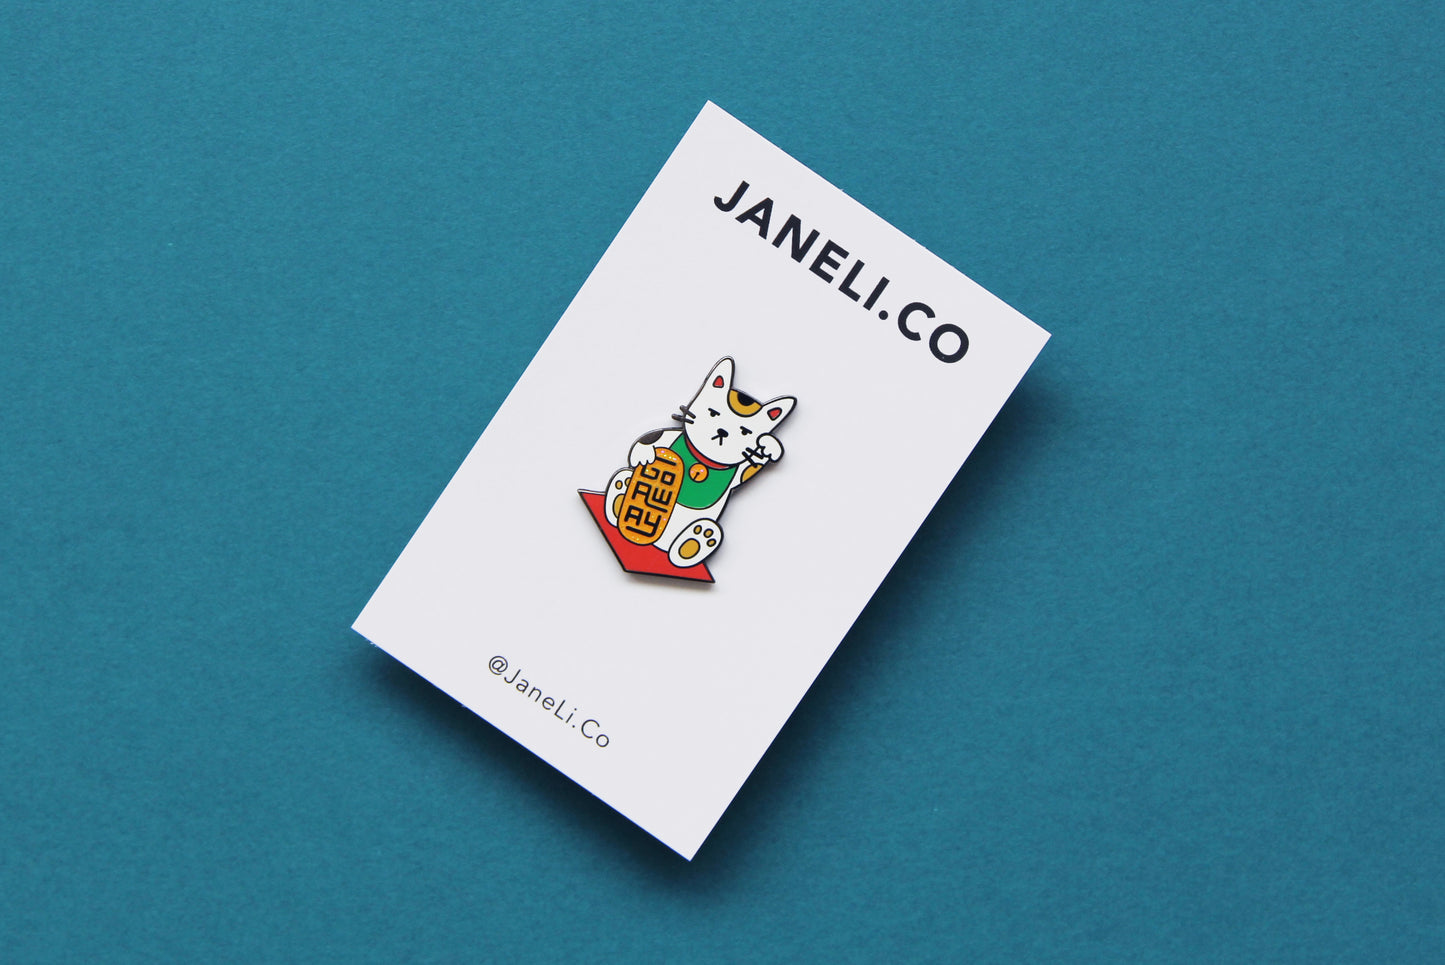 An enamel pin showing maneki neko cat holding a glittery gold bar that says "Go Away" on a white JaneLi.Co backing card over a teal blackground.